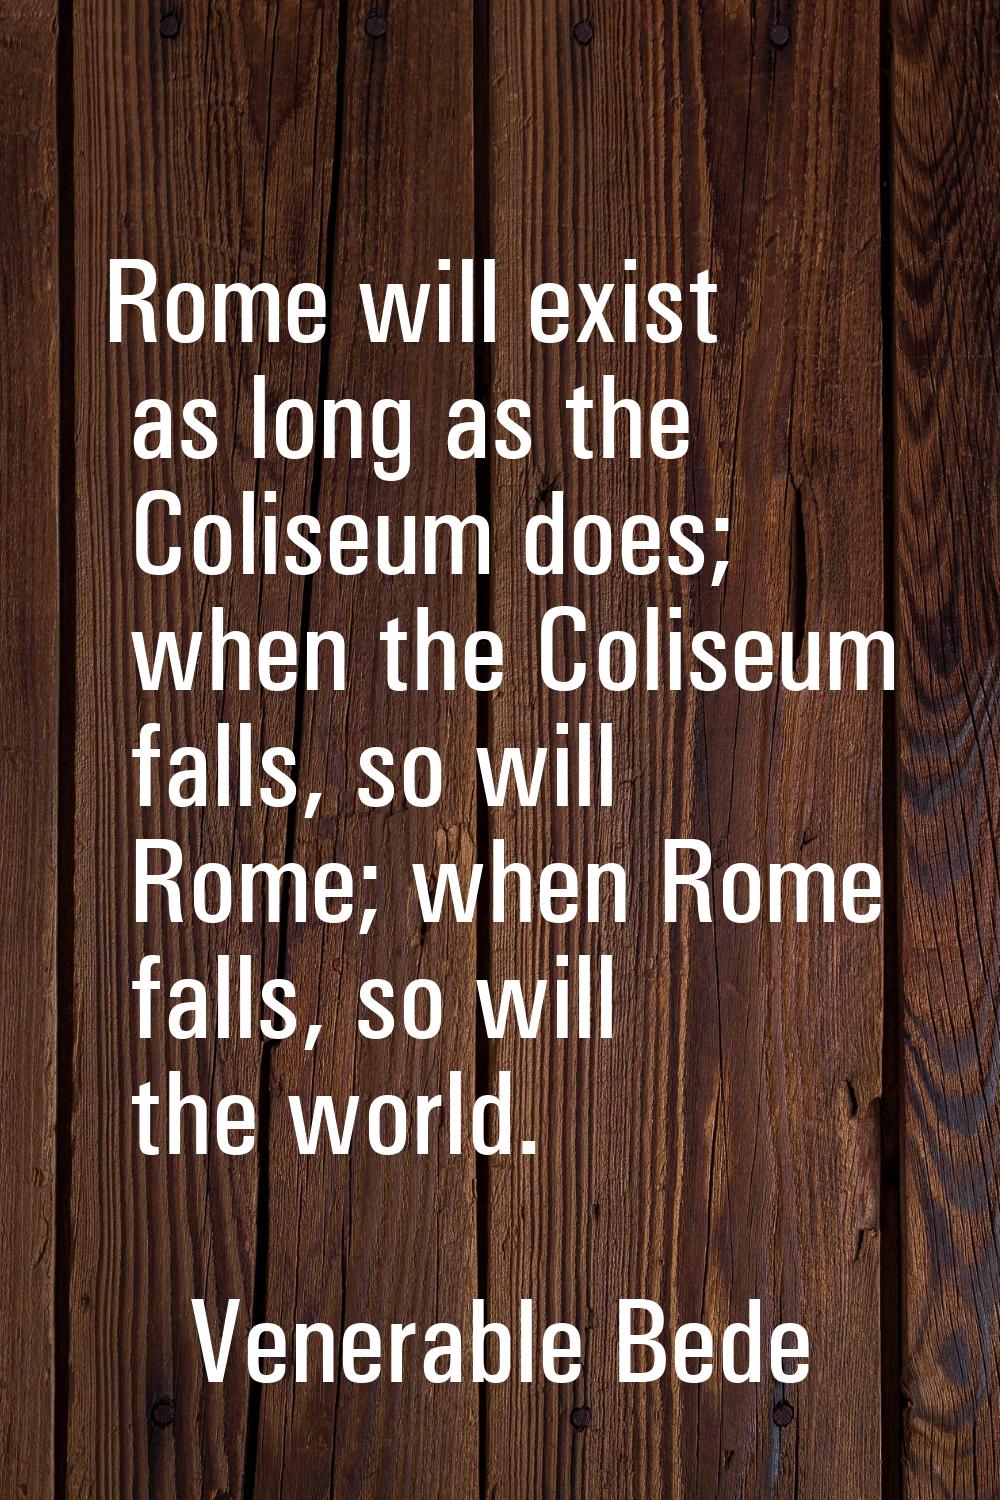 Rome will exist as long as the Coliseum does; when the Coliseum falls, so will Rome; when Rome fall